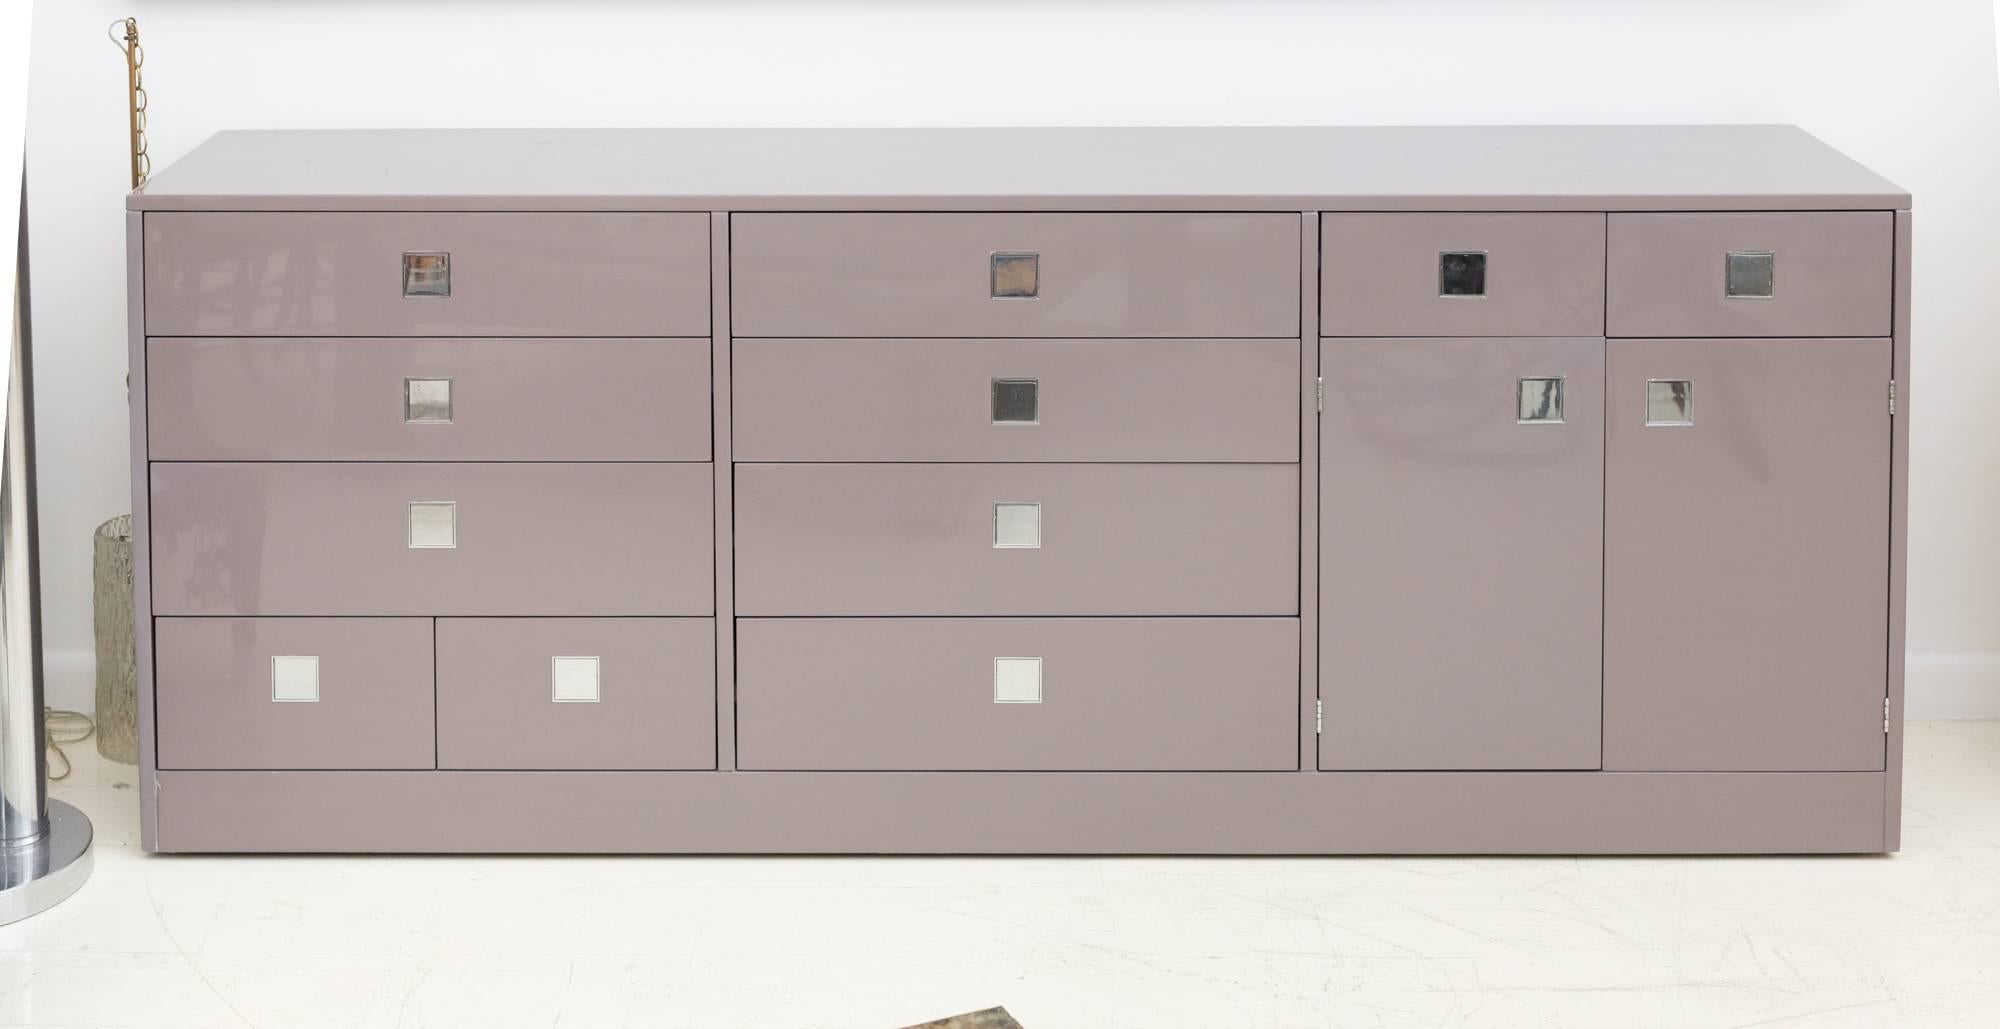 Credenza by Milo Baughman
for Directional Custom Collection, featuring
Lacquer piano finish, multiple drawers
and a shelf behind double doors,
Original Super cool recessed square
pulls in nickel finish.
Metal tag inside top left drawer.
  